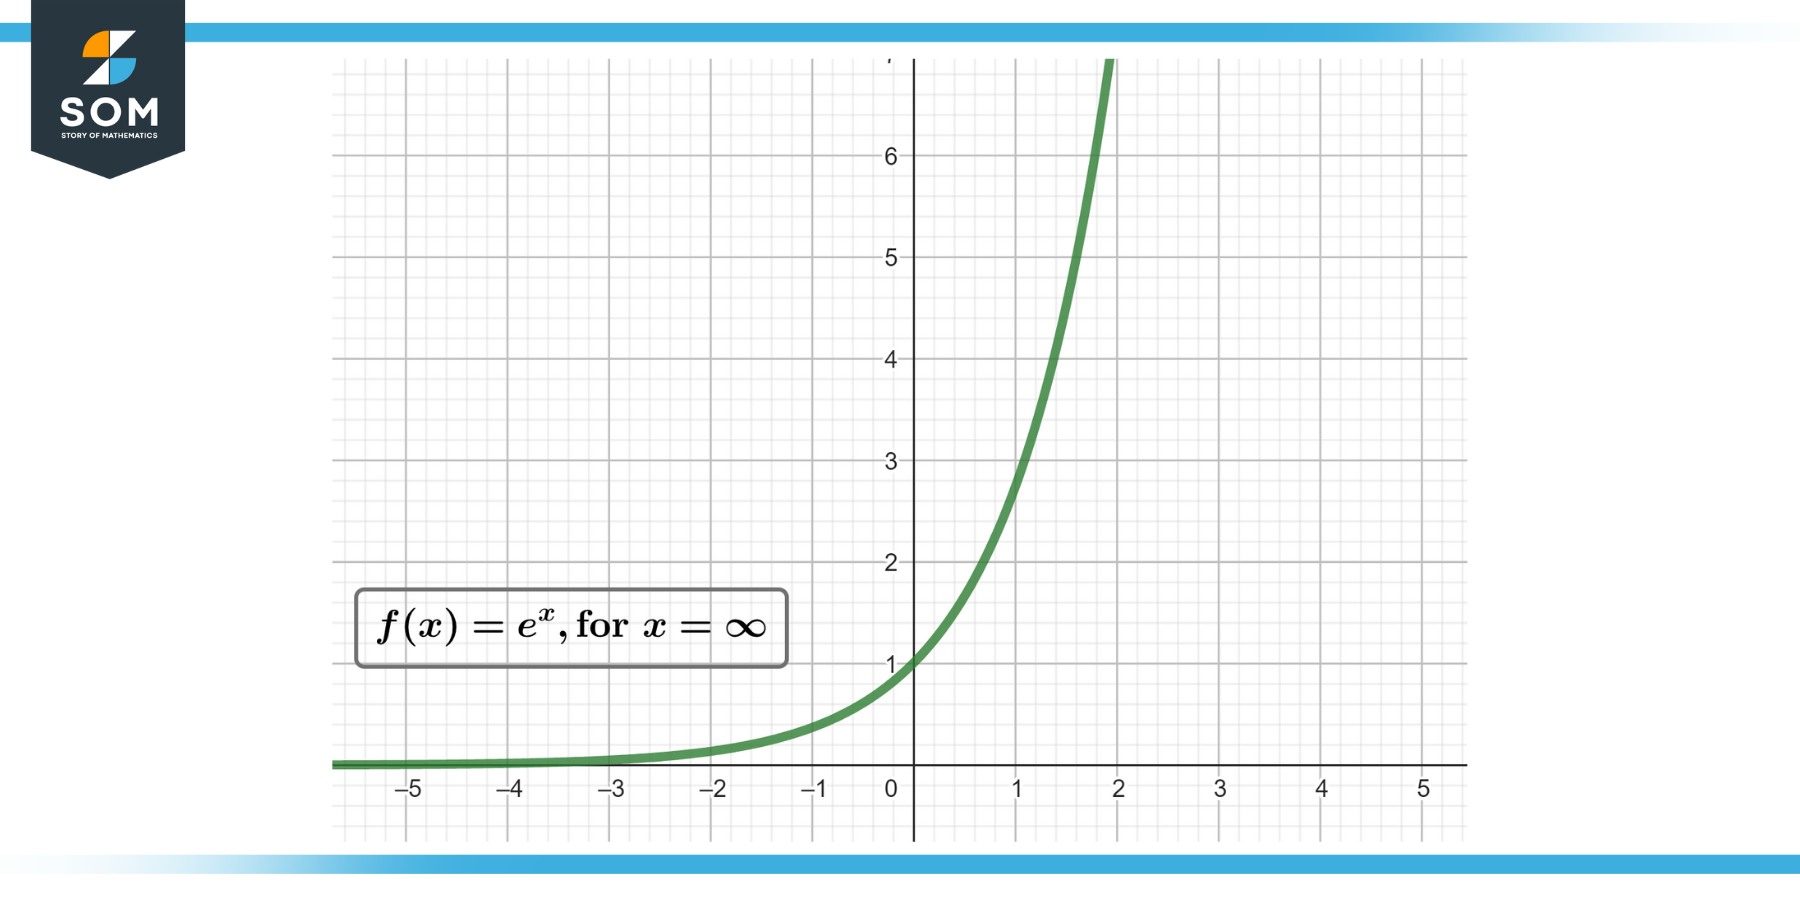 Generic representation of an exponential function with x approaches infinity